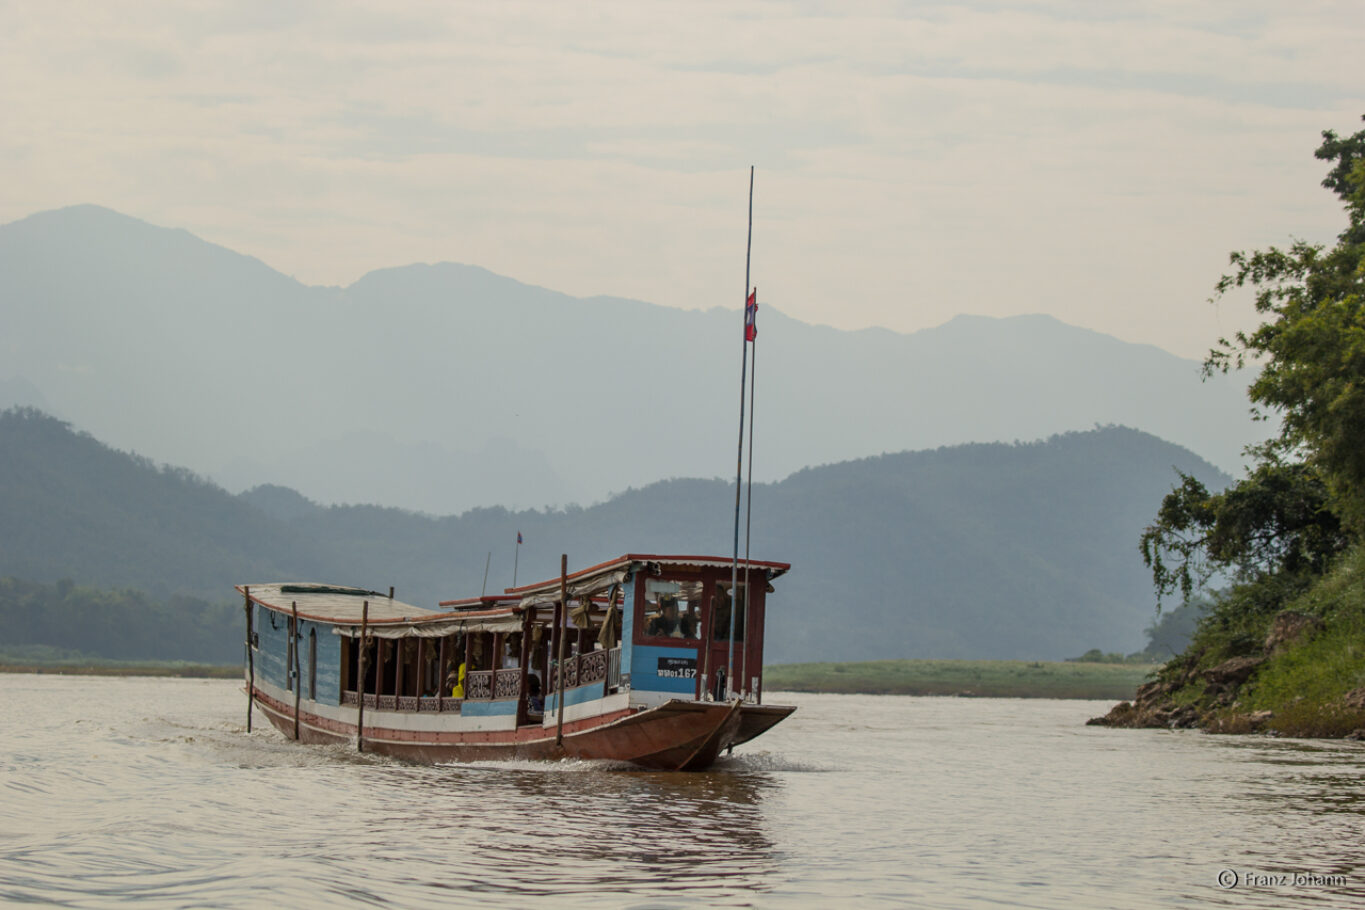 Gliding down the Mekong